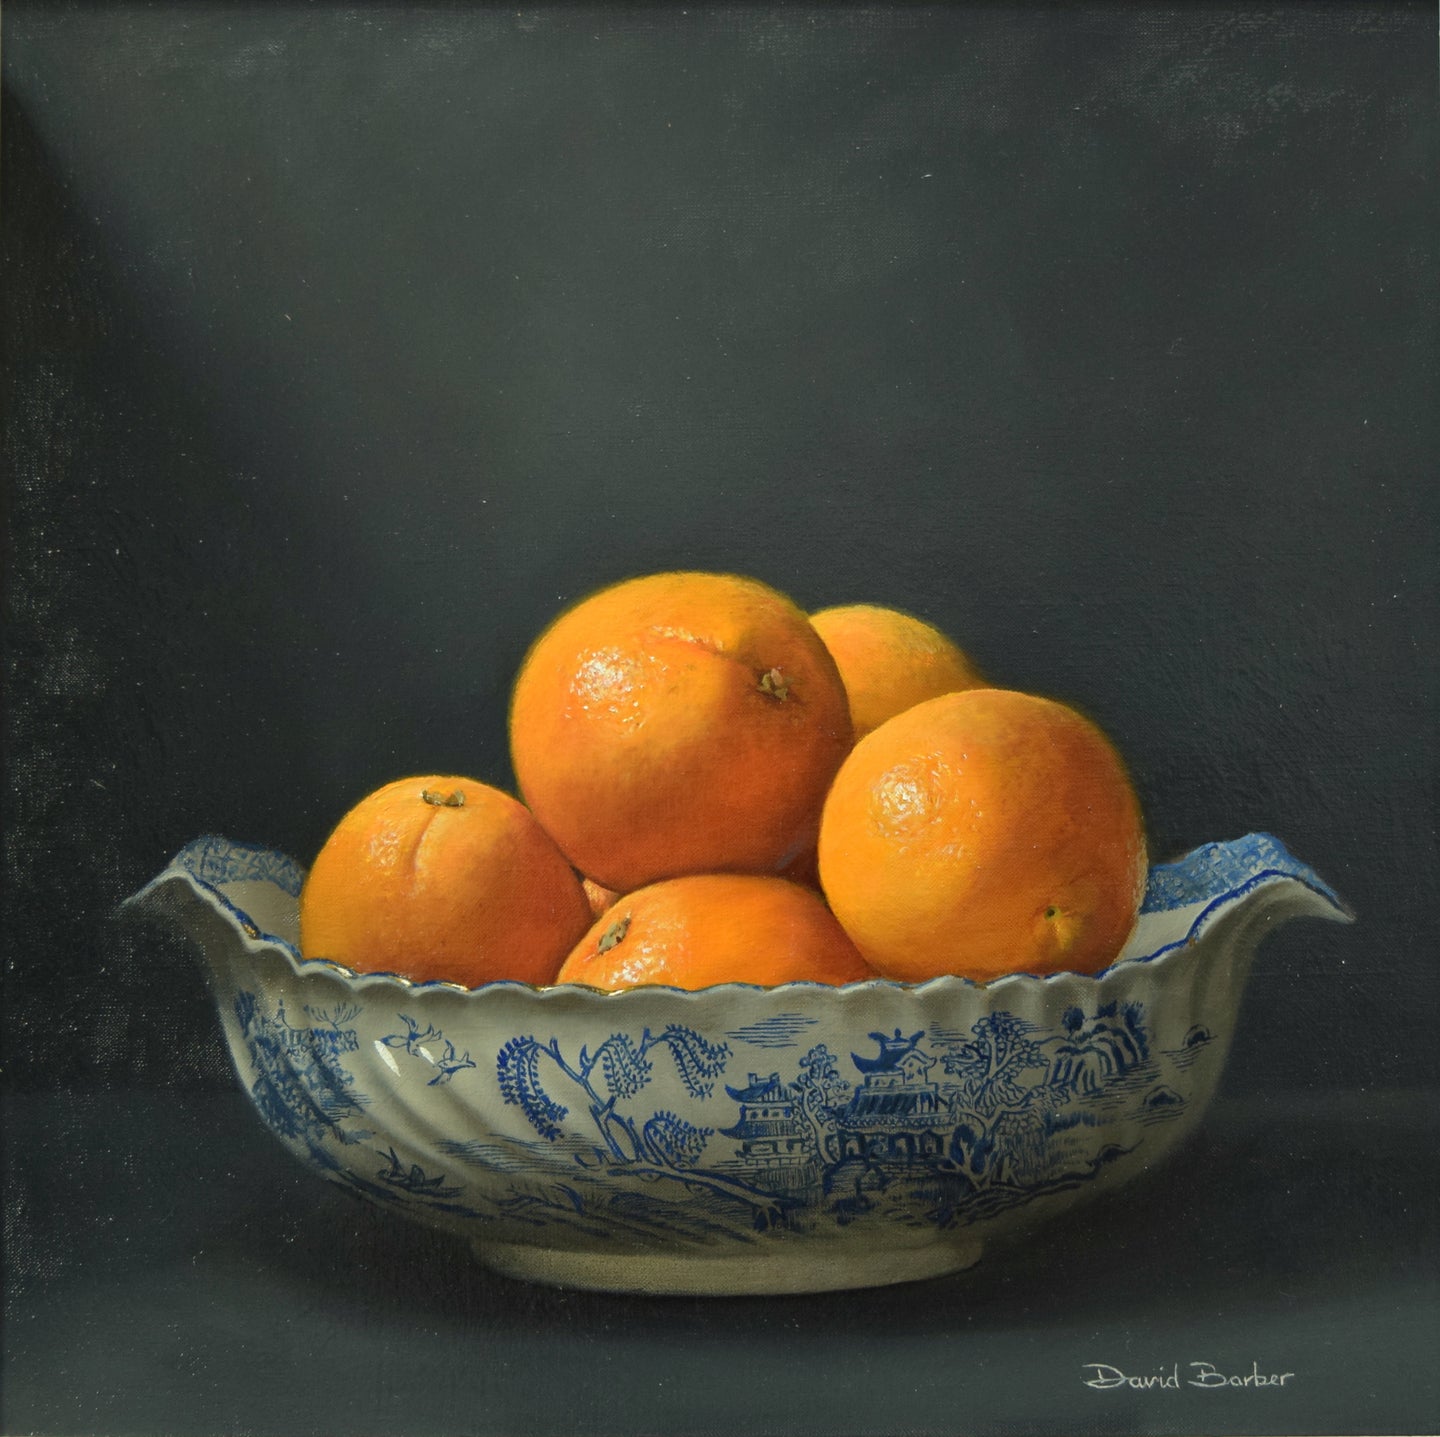 16 x 16 inch Oil on Linen Canvas, of a Willow-Pattern blue and white bowl with oranges, with light source from the left, with a dark background. Classically painted, very realistic.